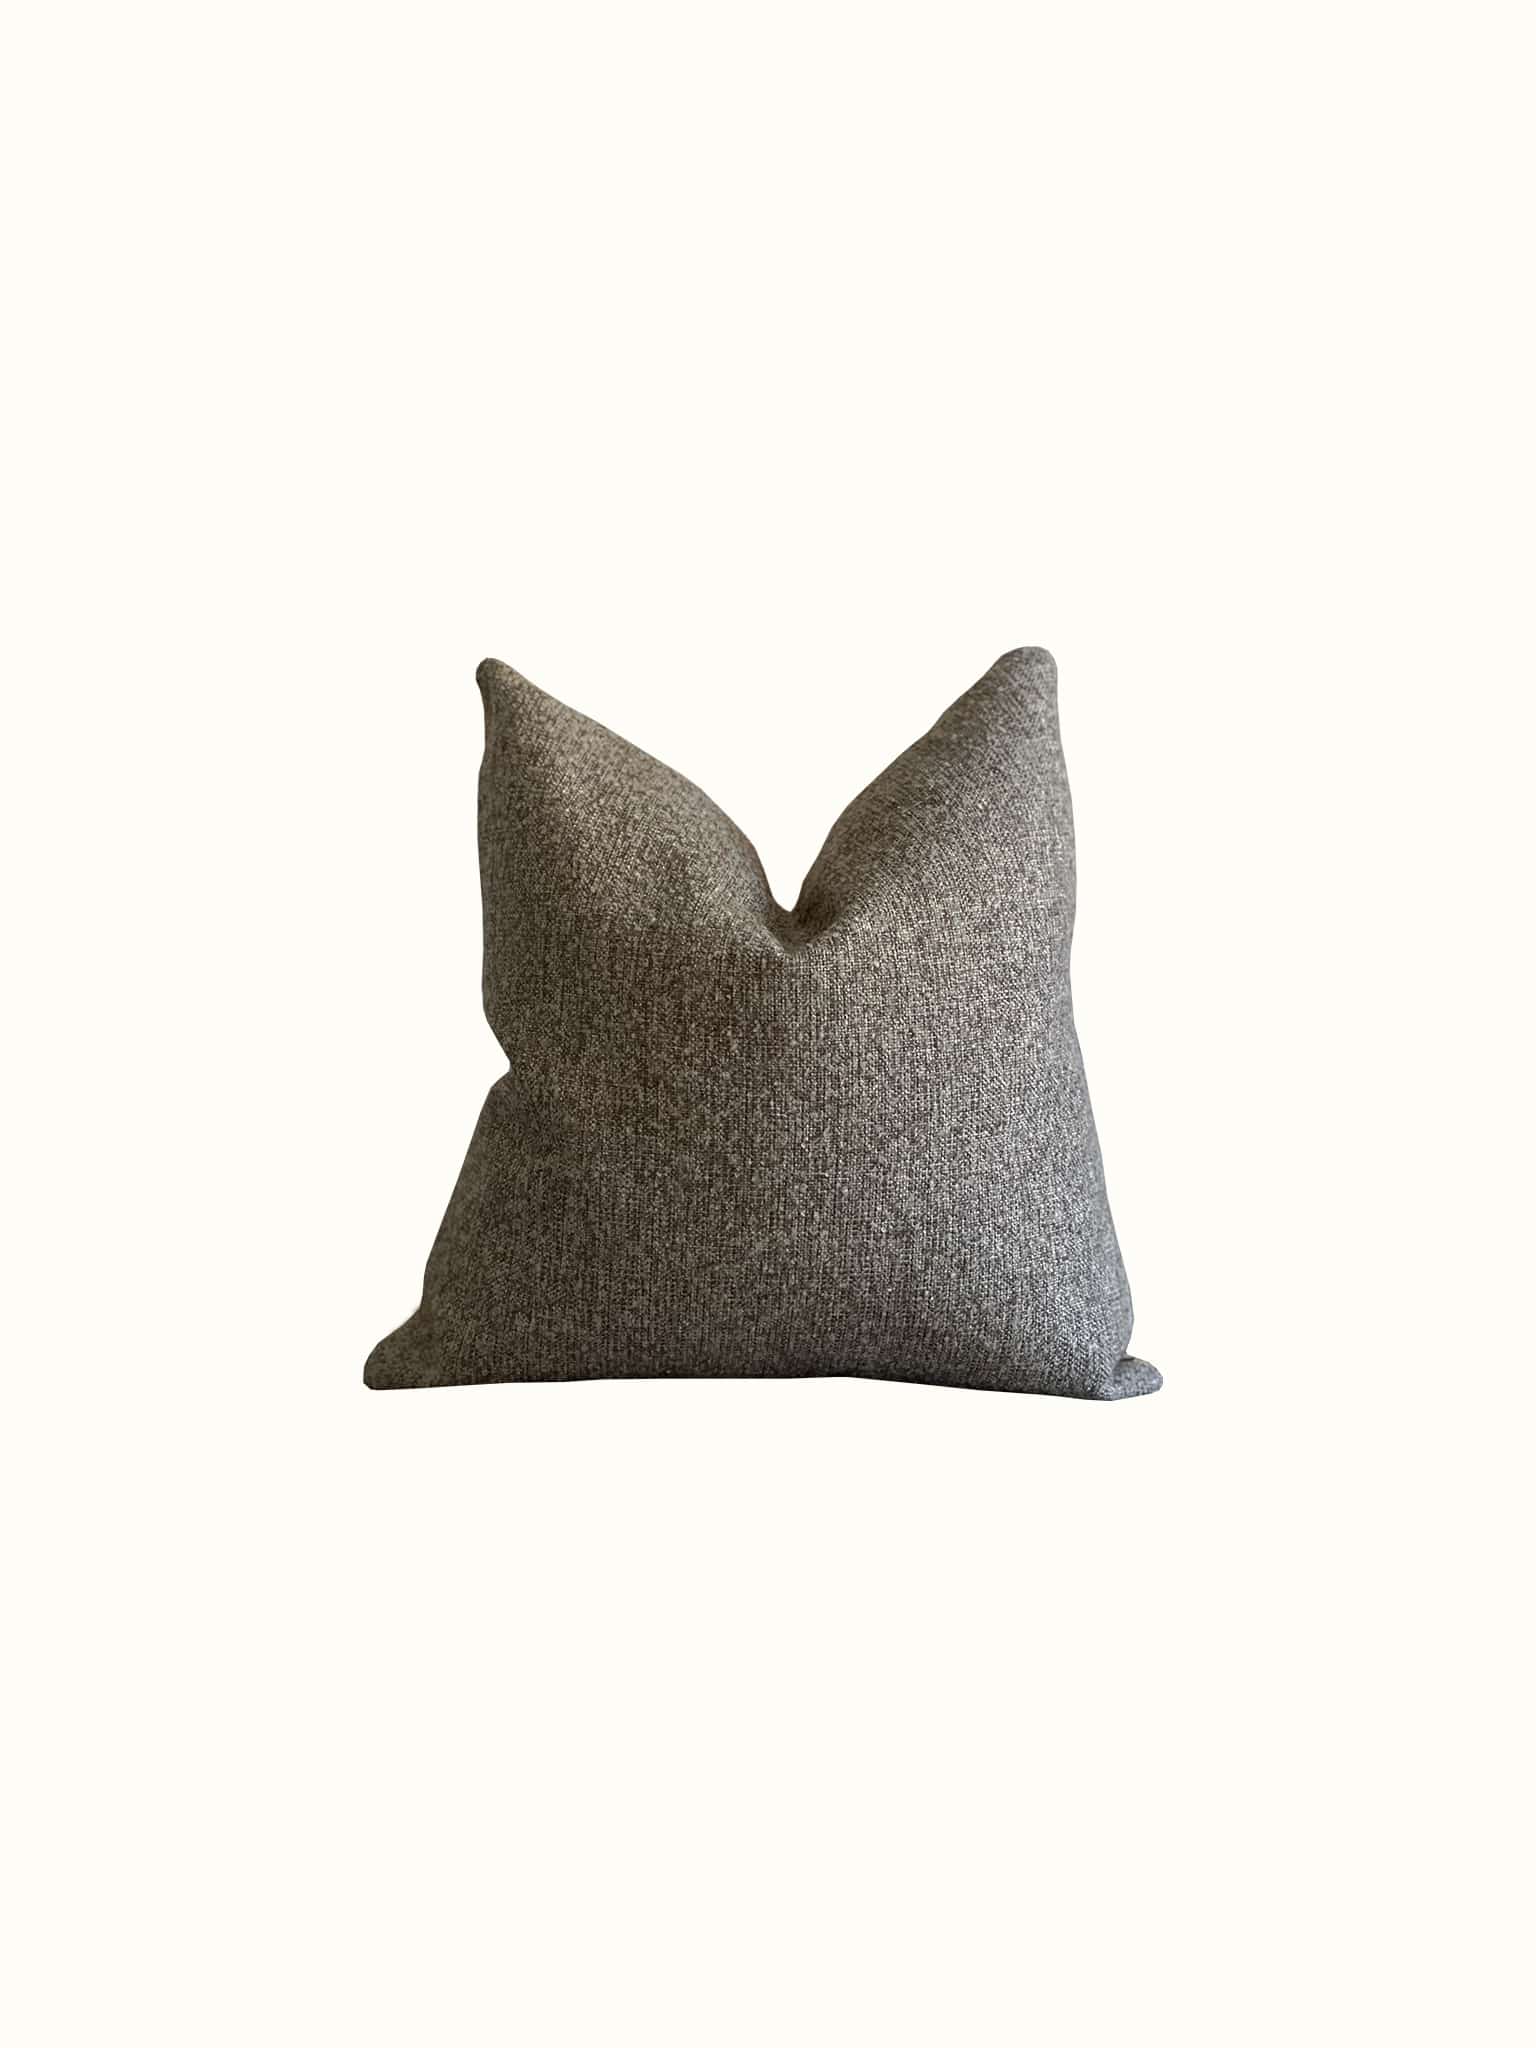 A boucle throw pillow in walnut, earthy brown color is made of thick and durable fabrics at Cielle Home